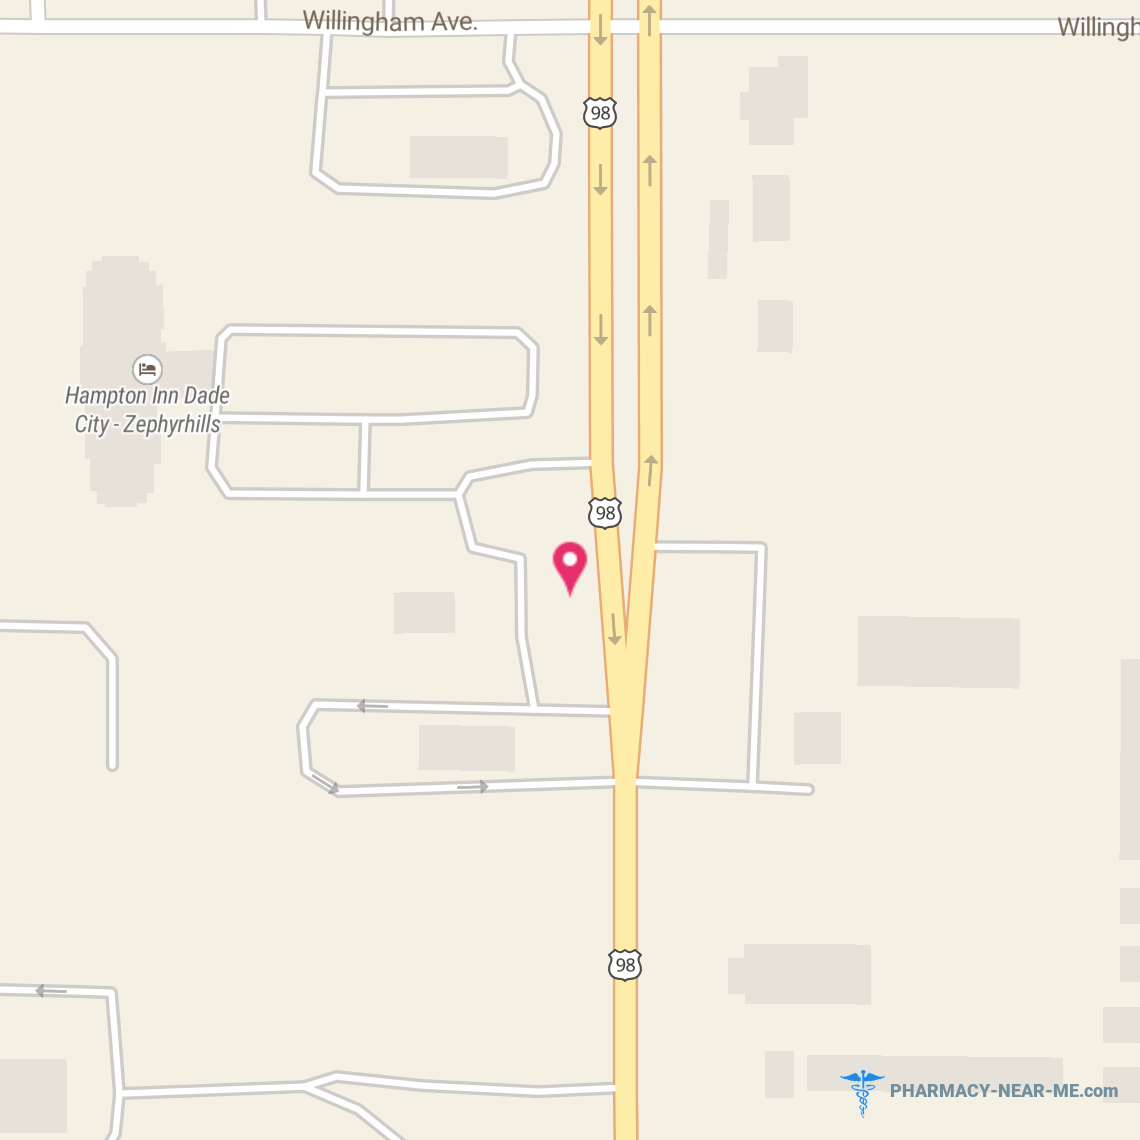 WALGREENS #04811 - Pharmacy Hours, Phone, Reviews & Information: 12807 US Highway 301, Dade City, Florida 33525, United States